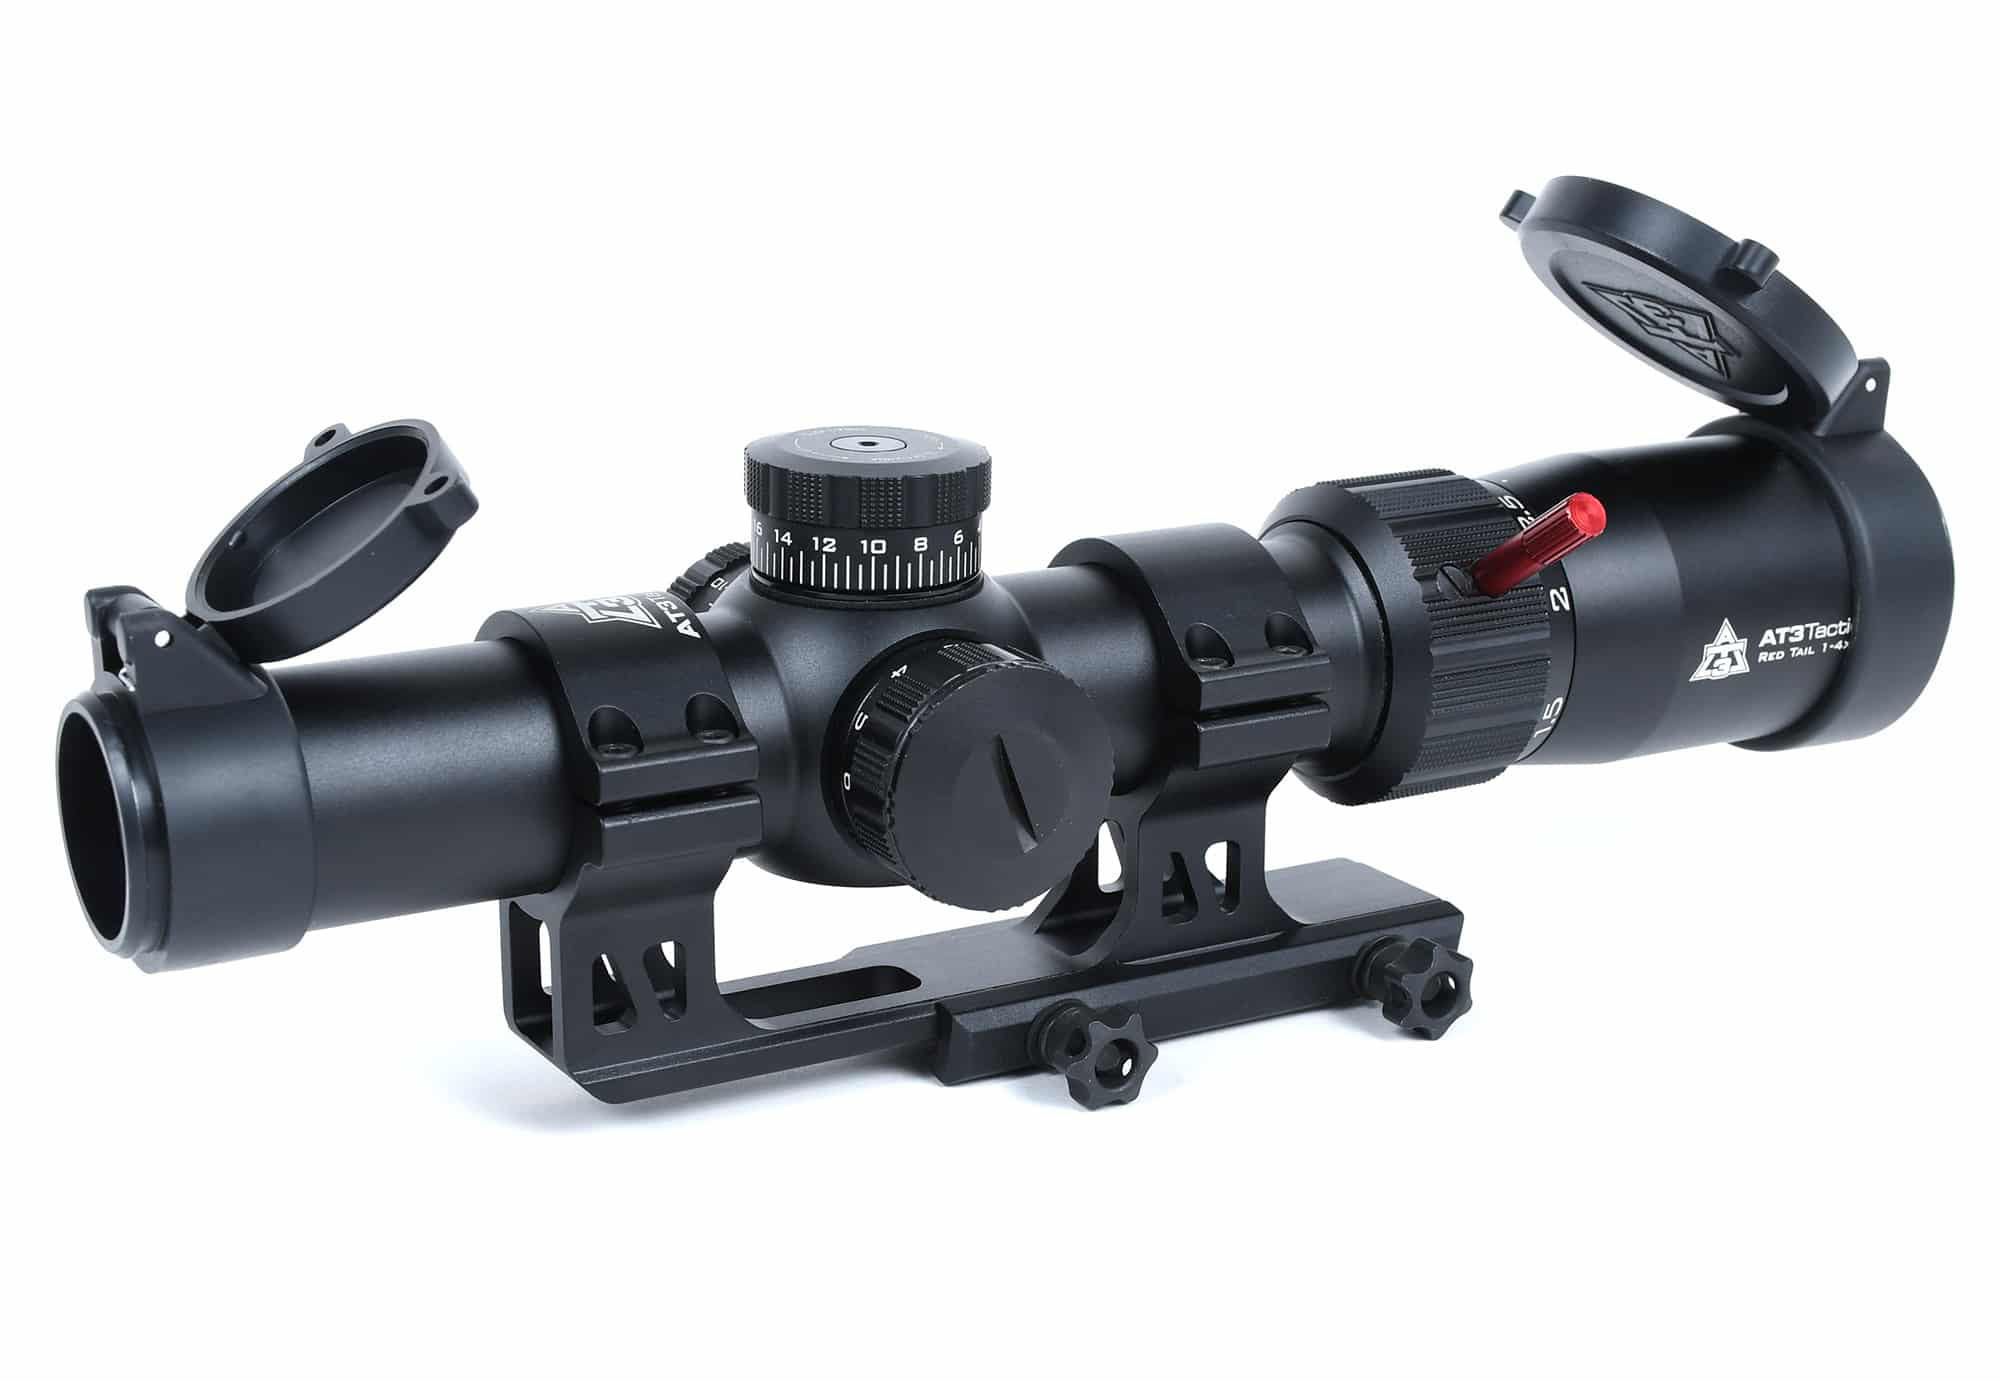 Винтовка с оптикой. Mepro Hunter Sniper's Night Vision Weapon Sight with x4 or x6 Magnification.. File scope